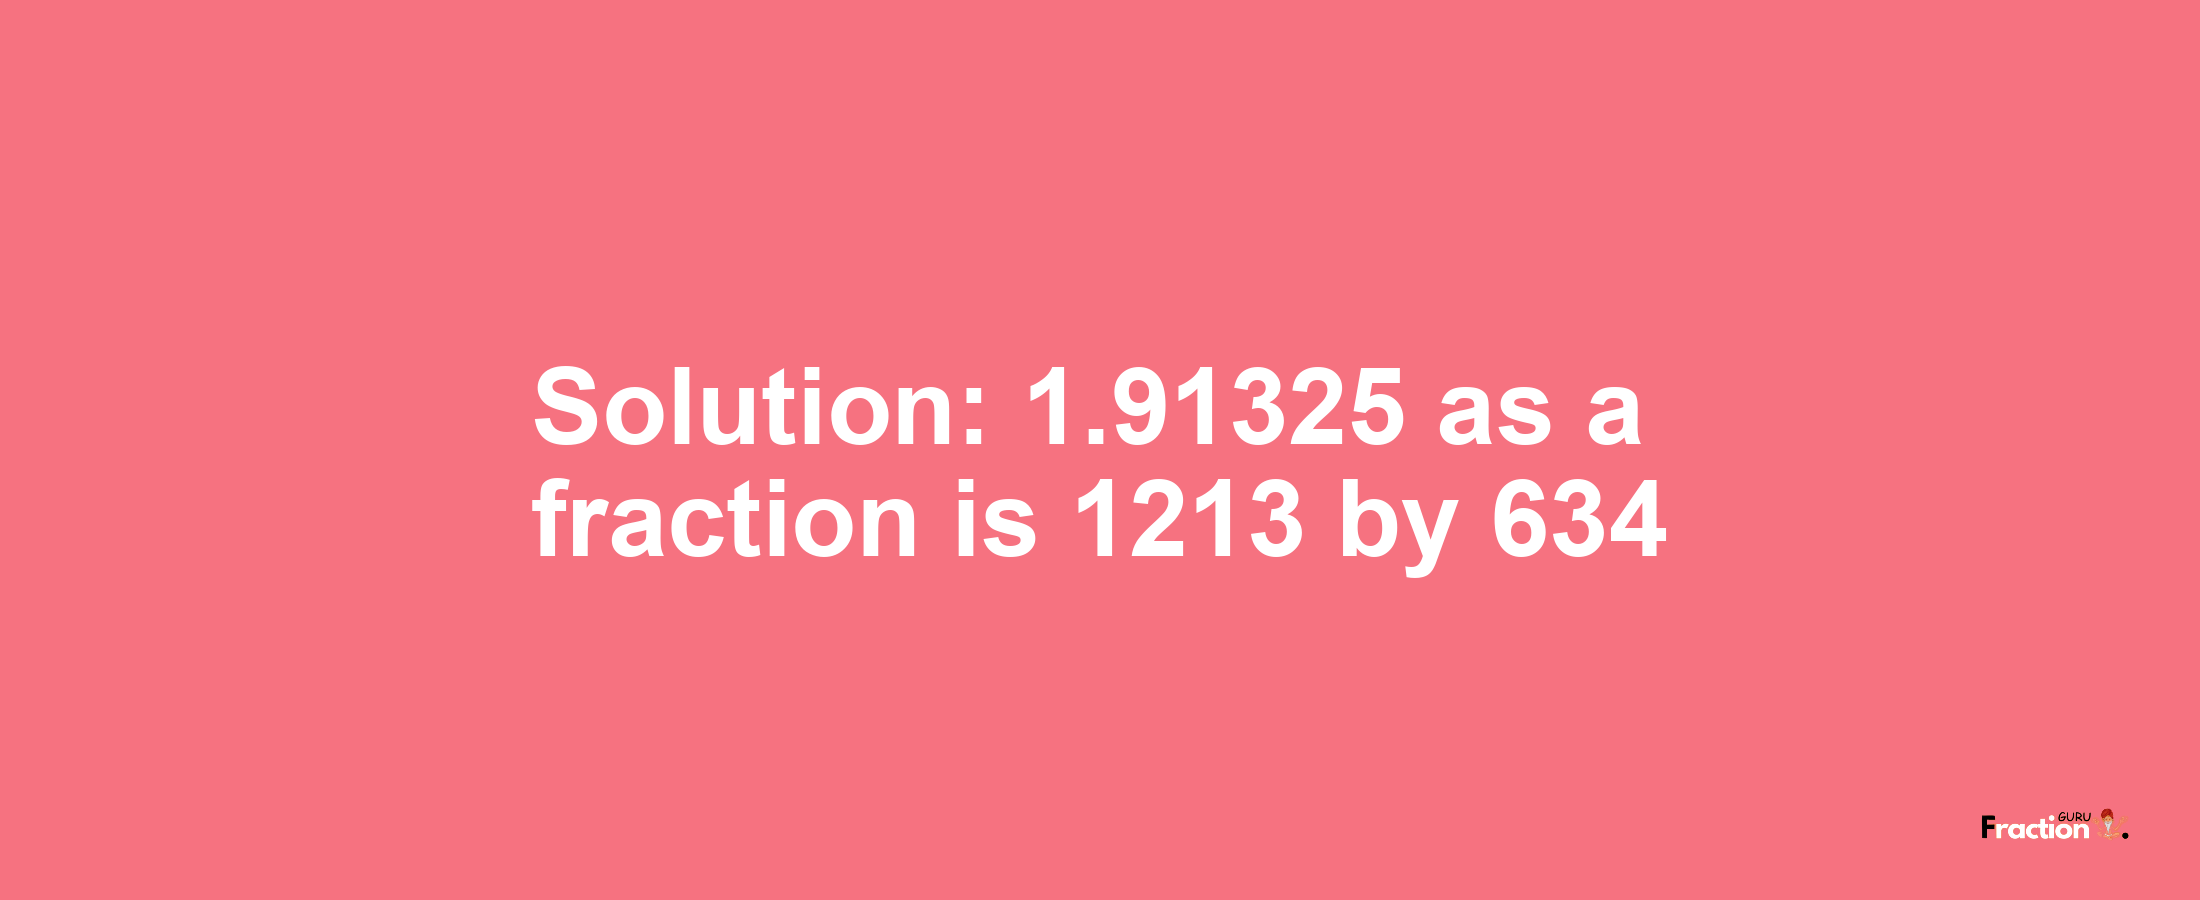 Solution:1.91325 as a fraction is 1213/634